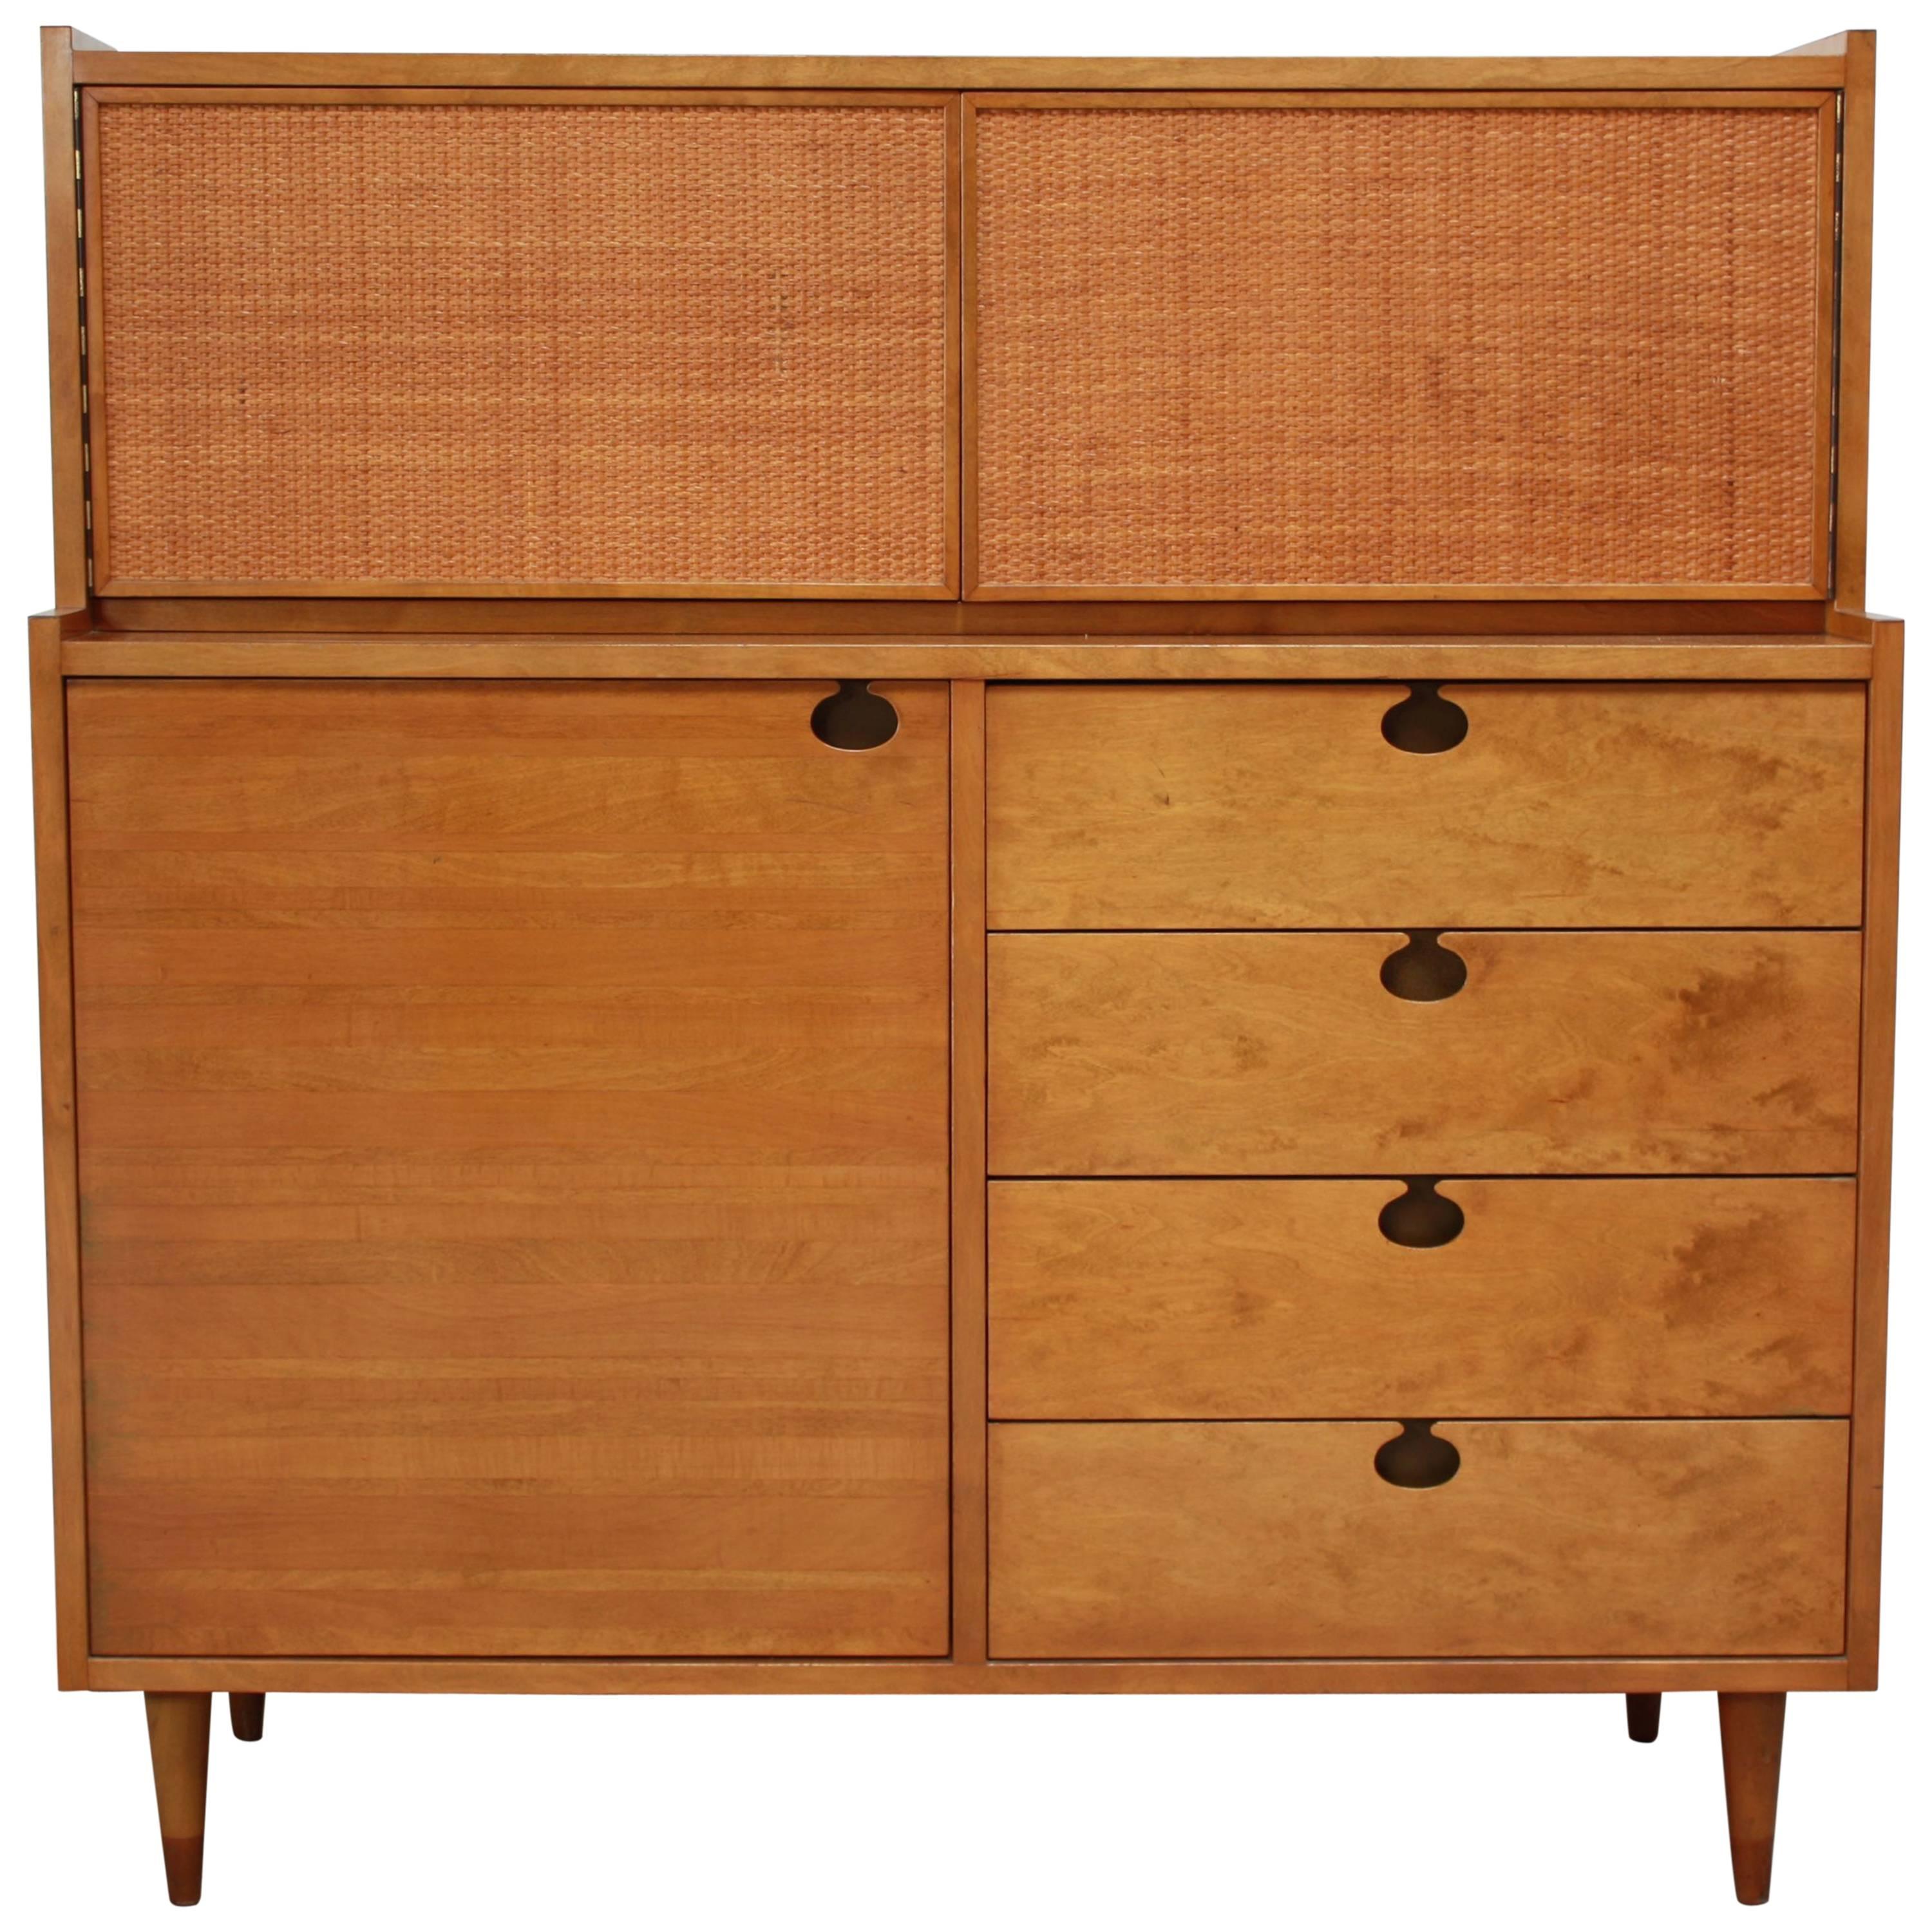 Edmond J. Spence Cabinet in Maple and Cane